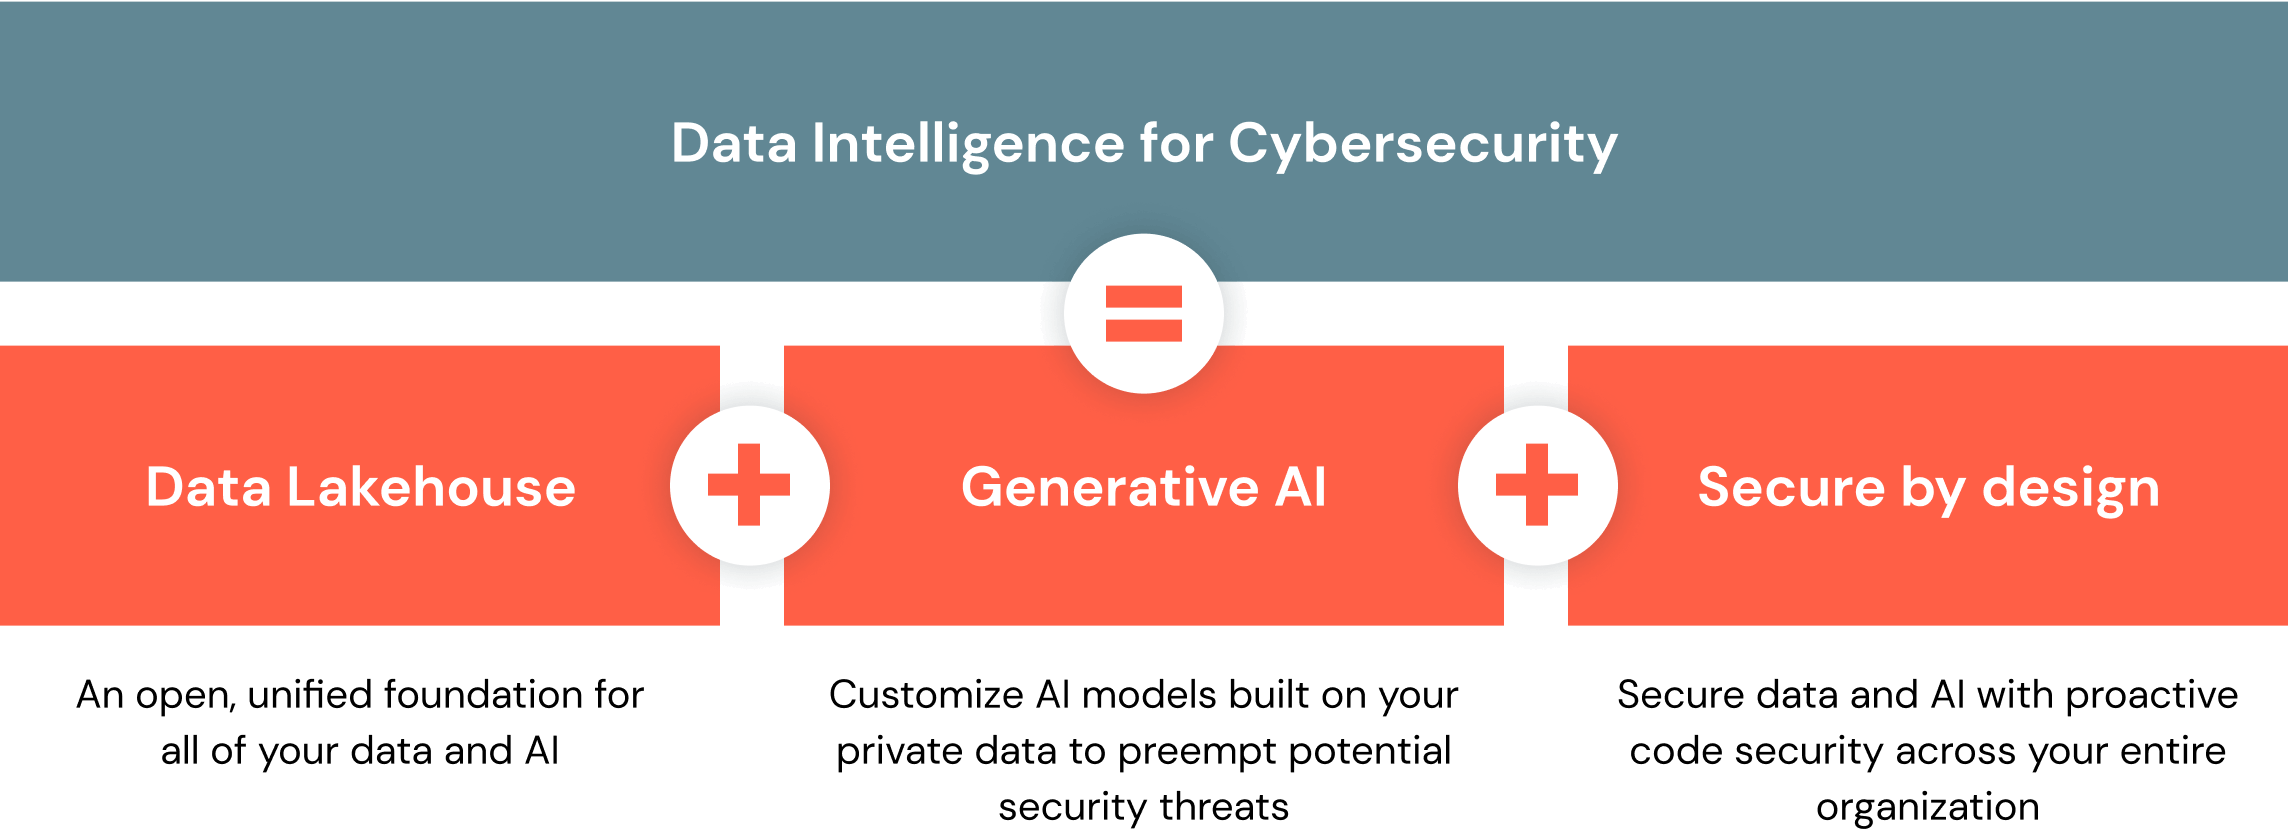 Data Intelligence for Cybersecurity